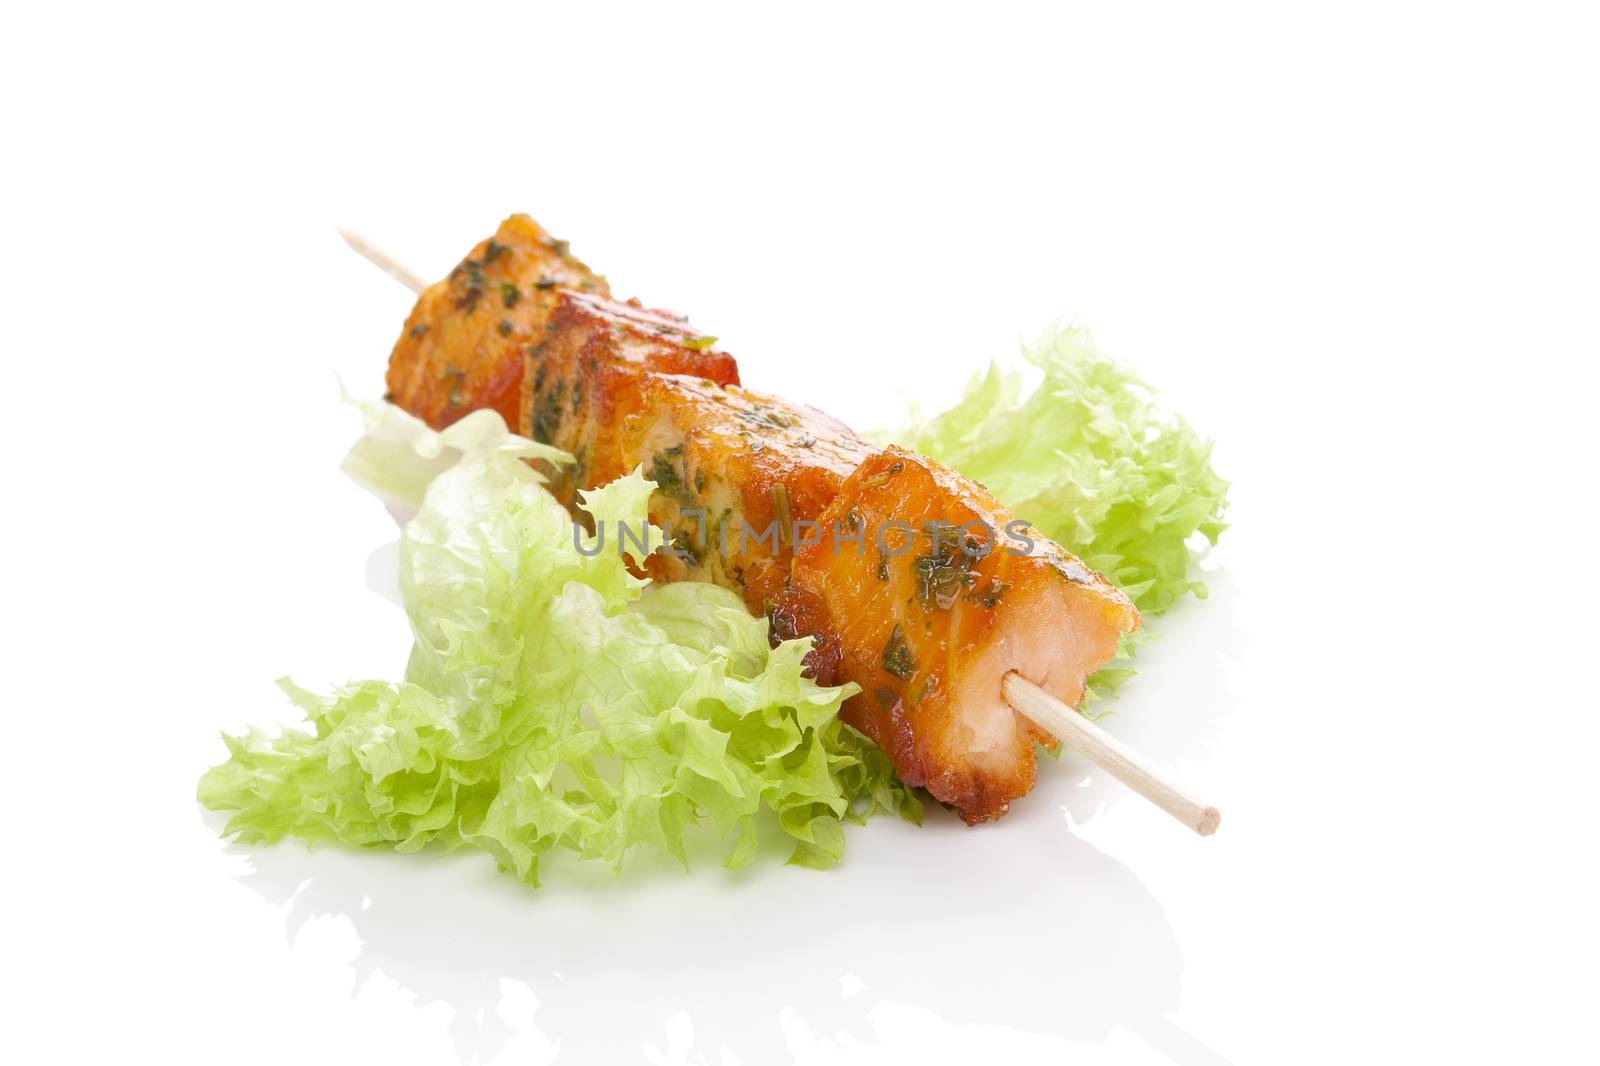 Salmon kebab. Salmon pieces on wooden skewer on green salad isolated on white background. Culinary salmon eating. 